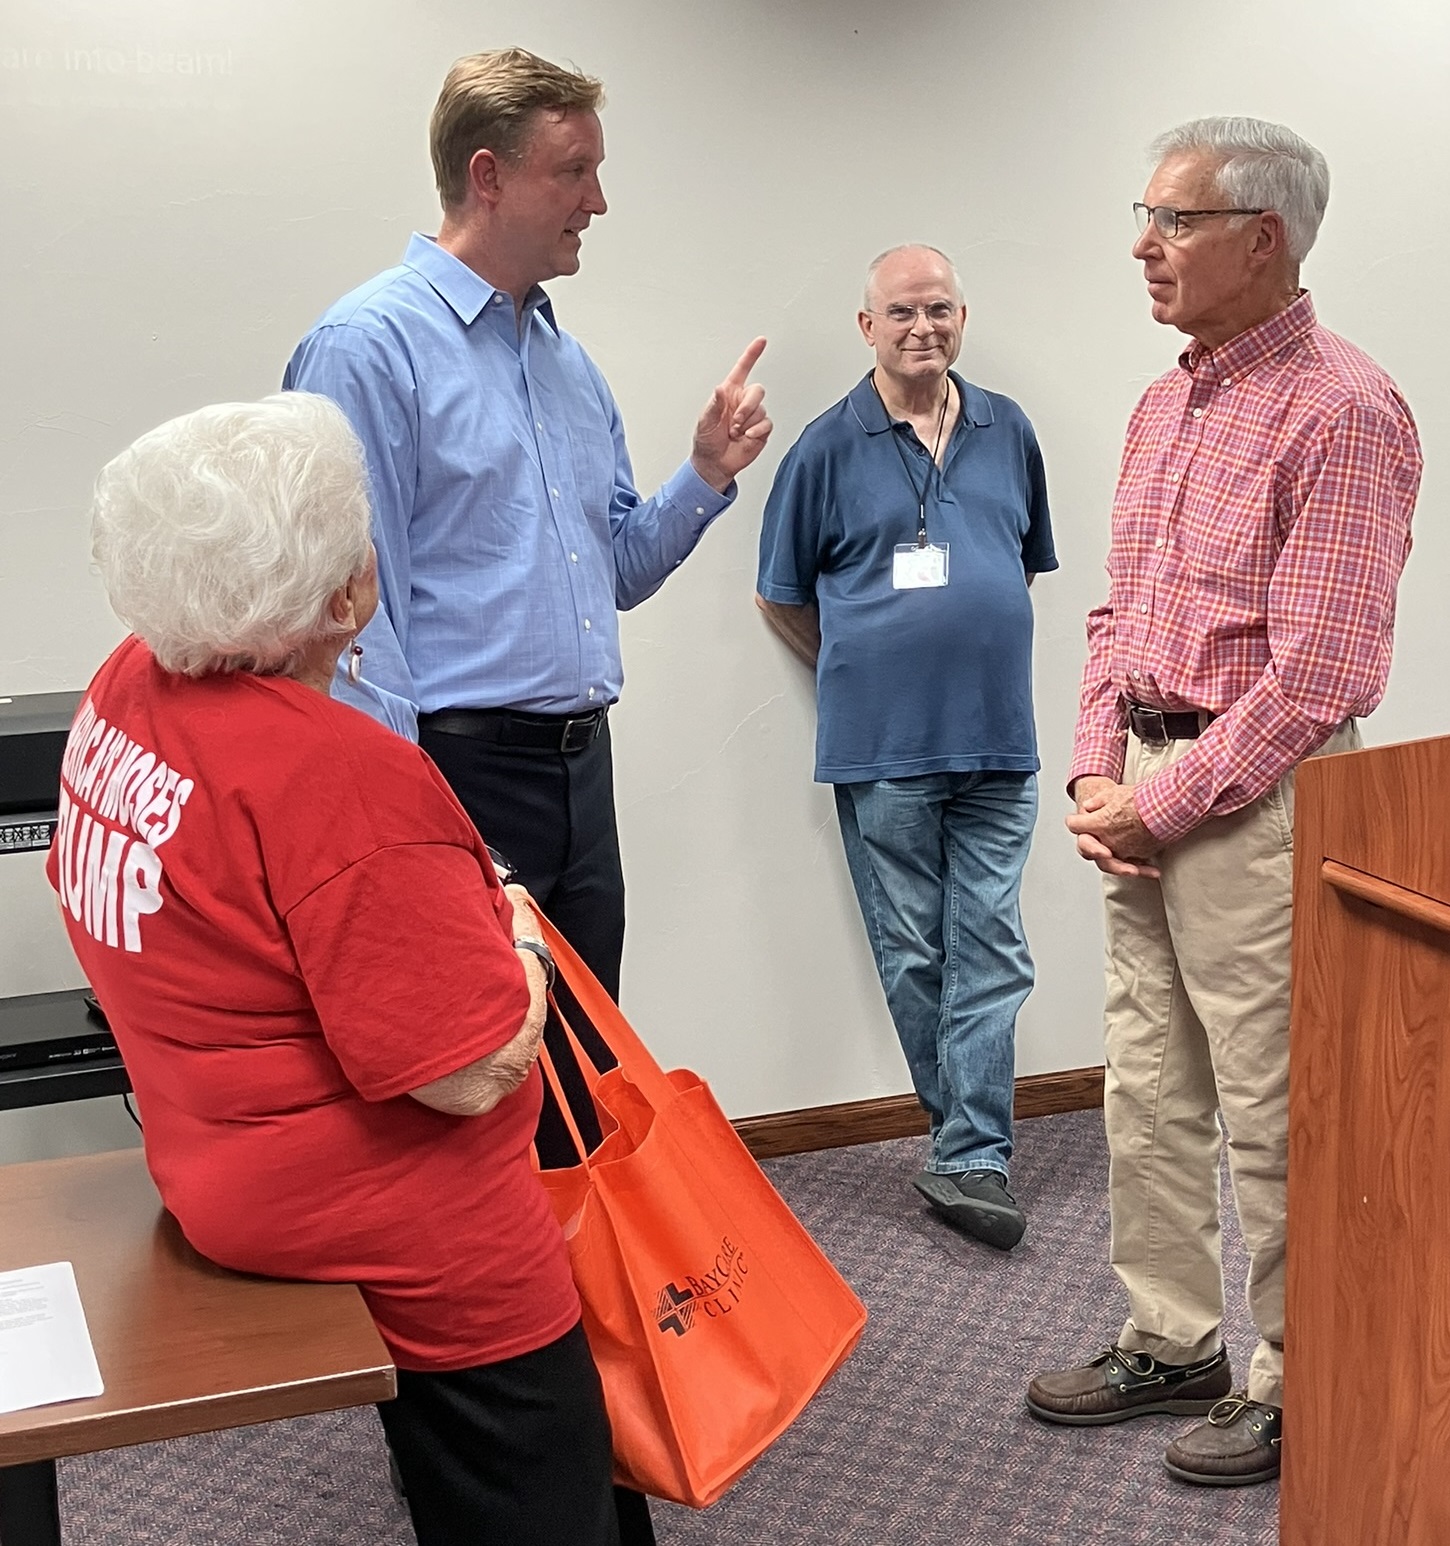 Dan Lennington, deputy counsel of the Wisconsin Institute for Law & Liberty, chats with a guest after the Fox Valley Initiative meeting on September 11, 2023.